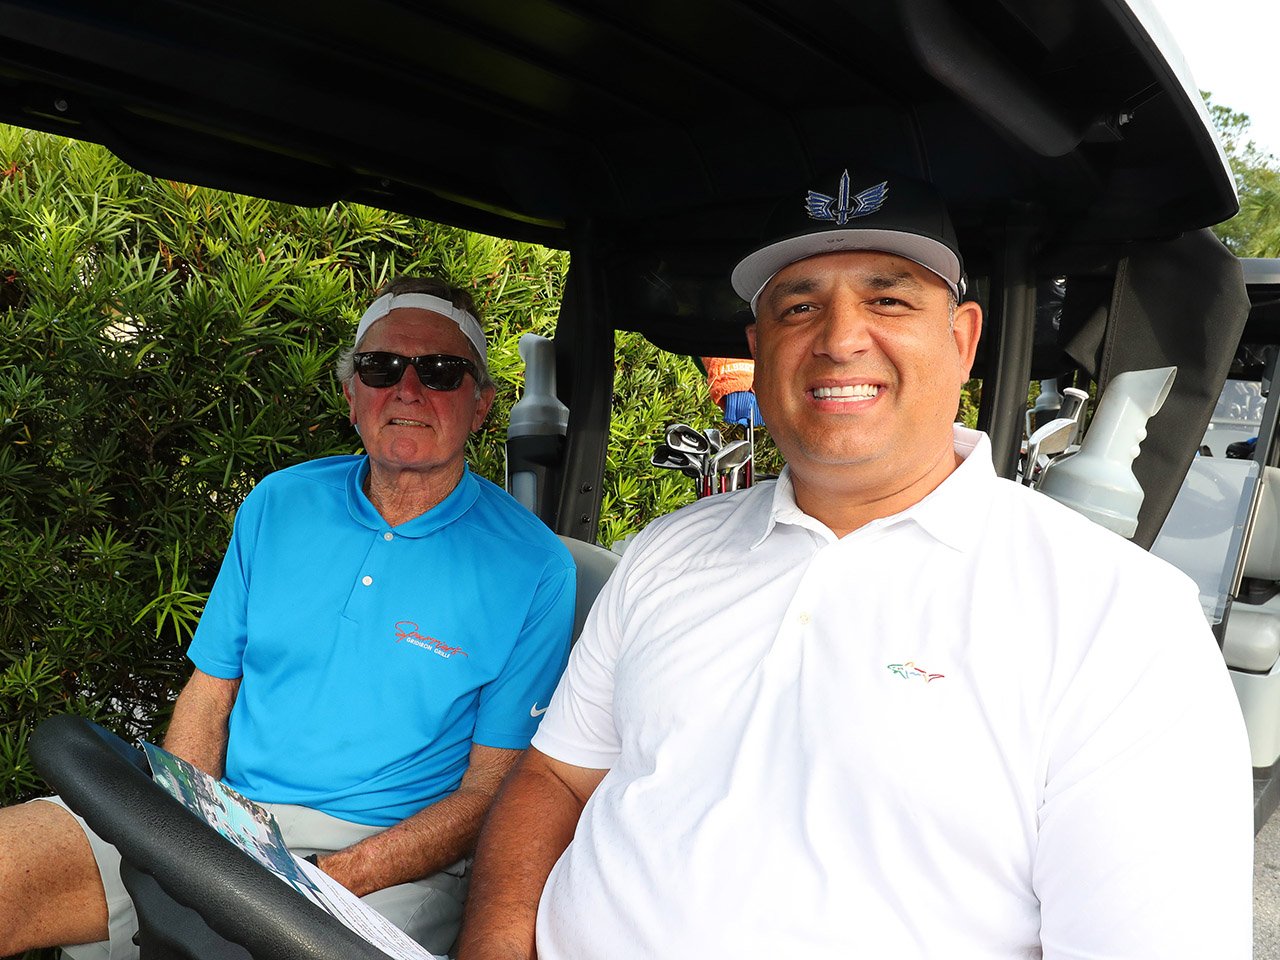 Steve Spurrier and Anthony Becht pair up for golf